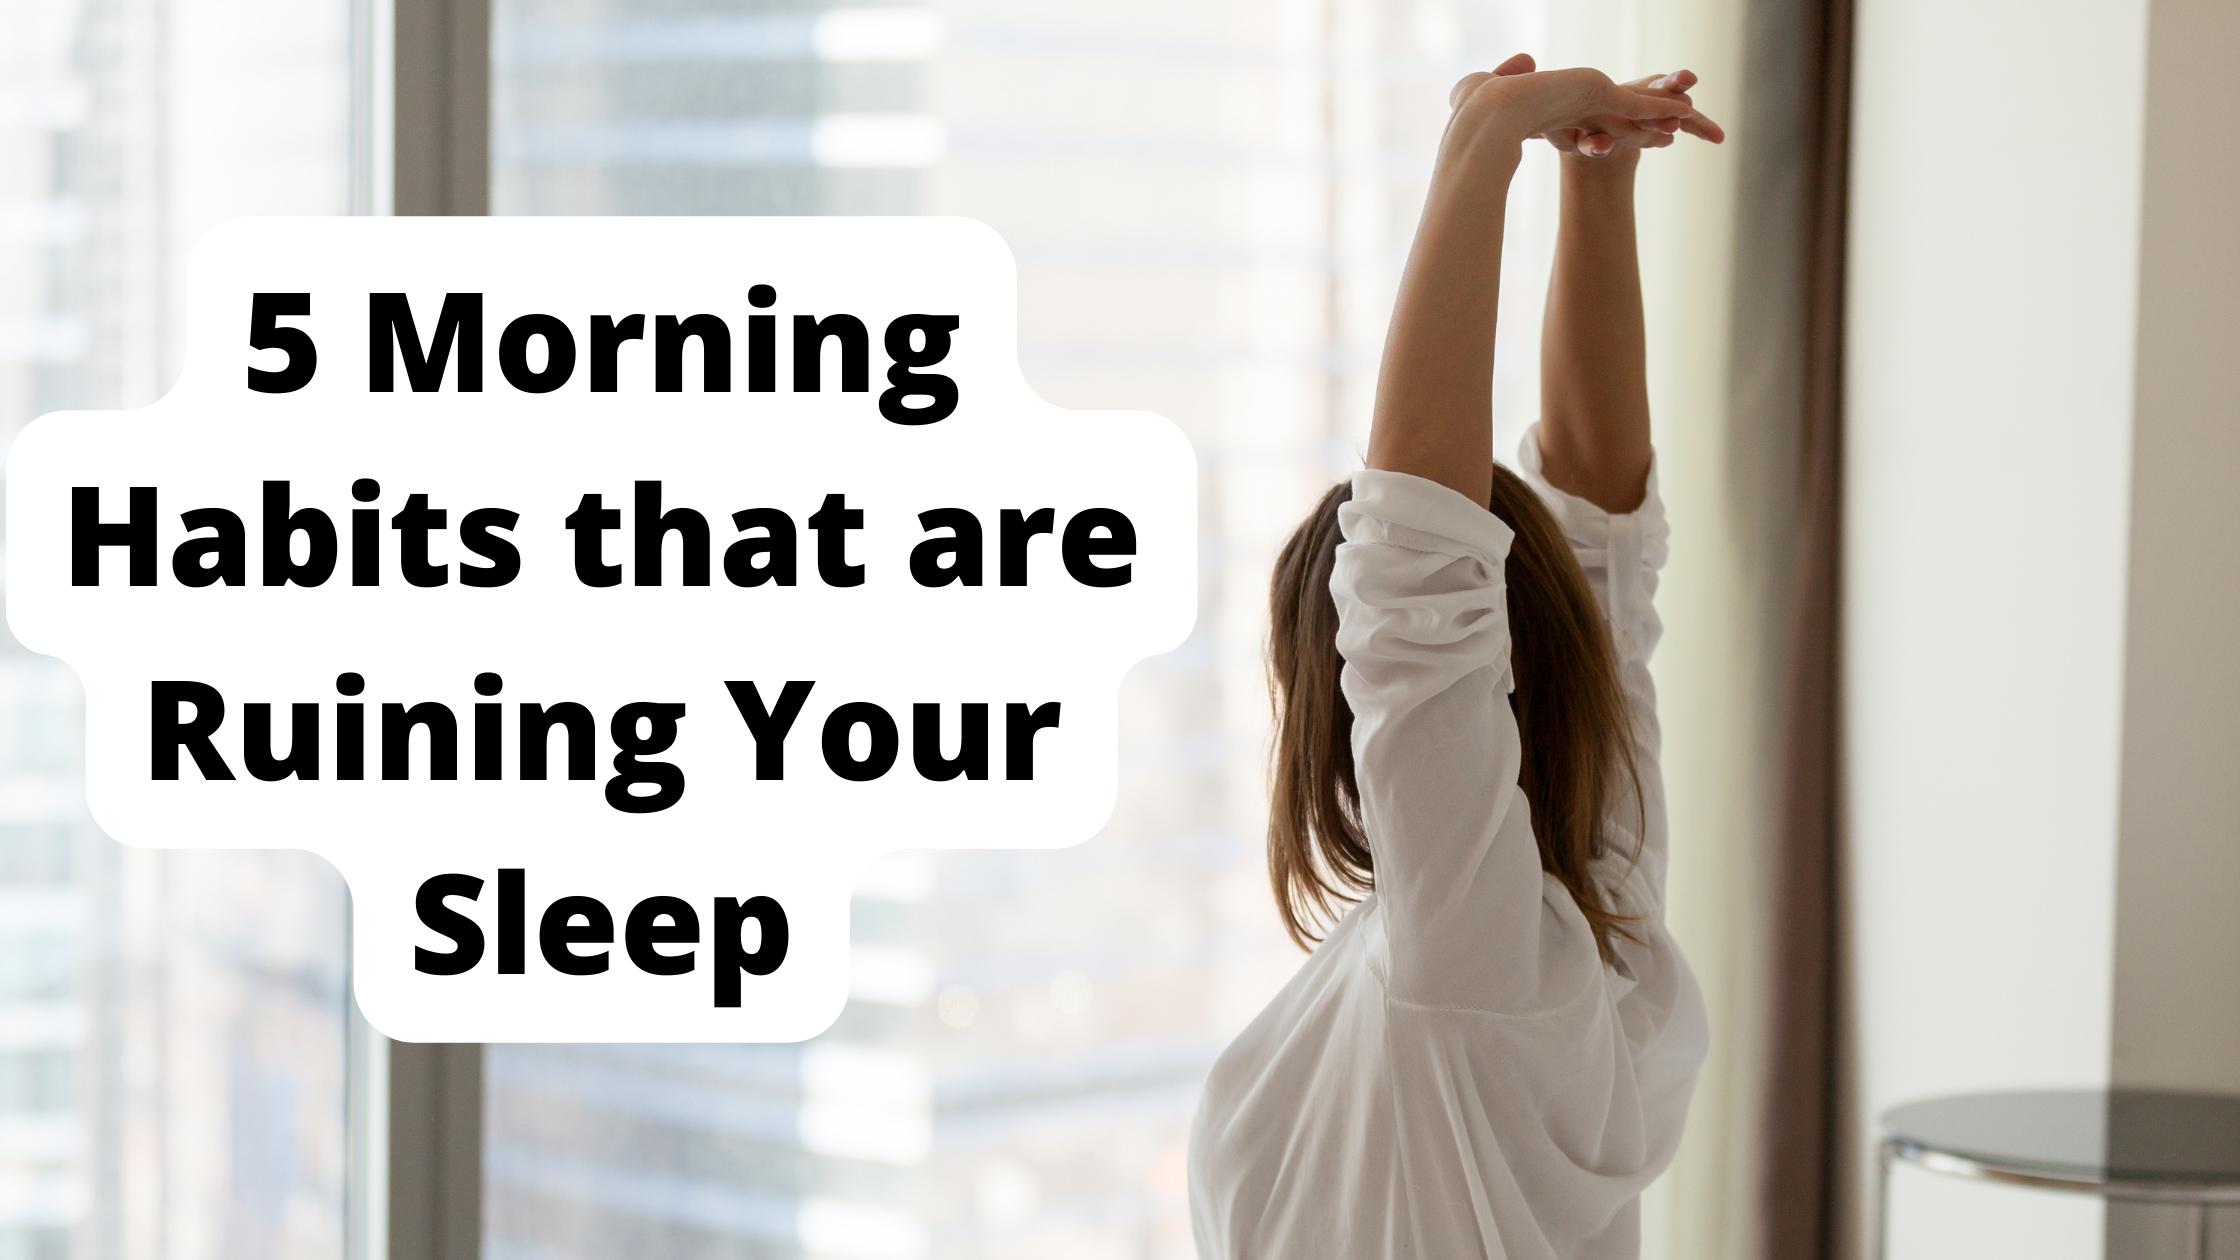 5 Morning Habits that are Ruining Your Sleep